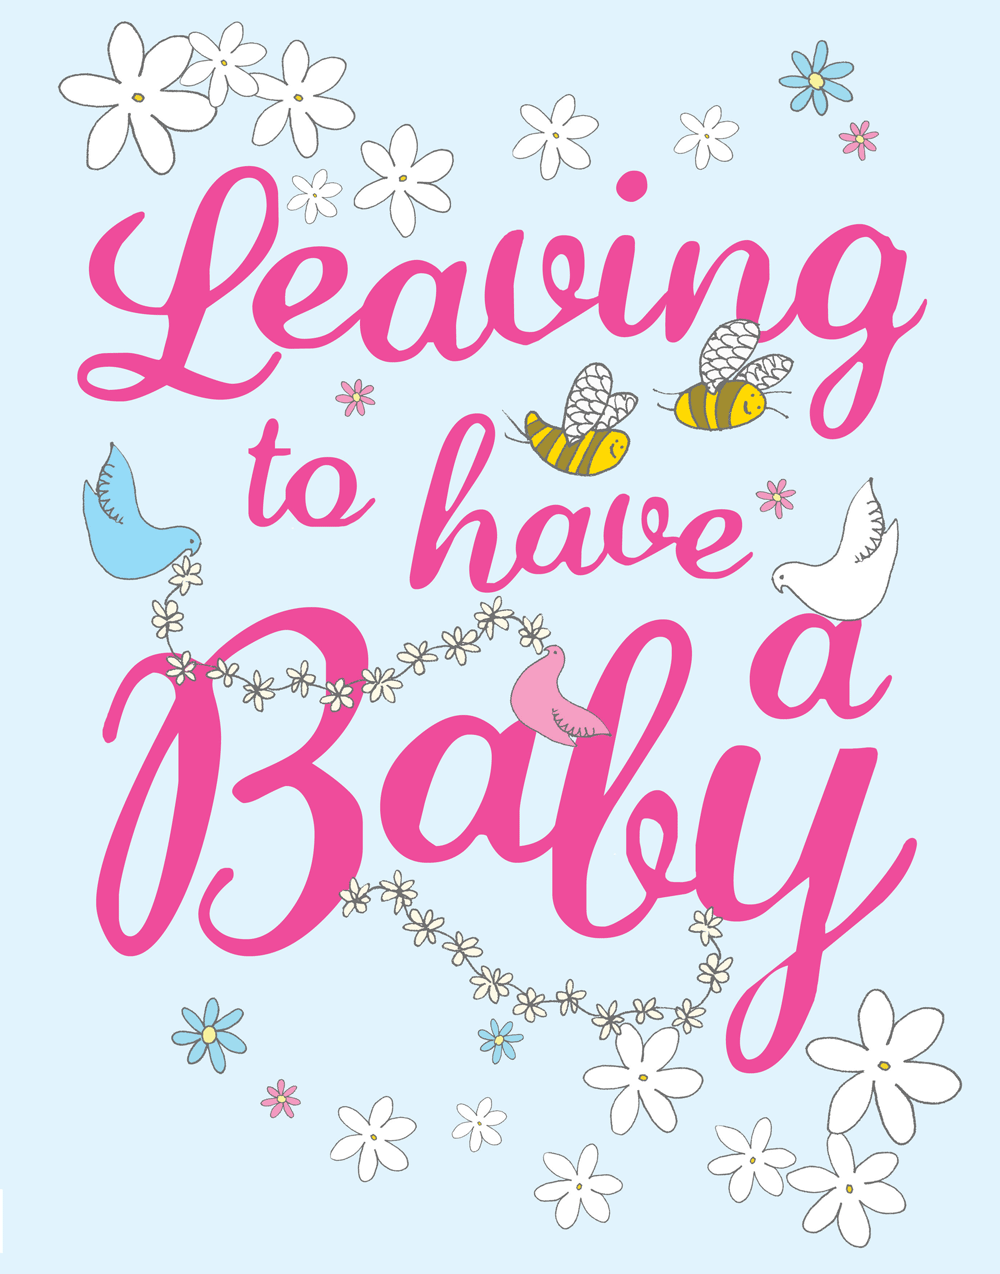 Leaving to have a Baby [Extra